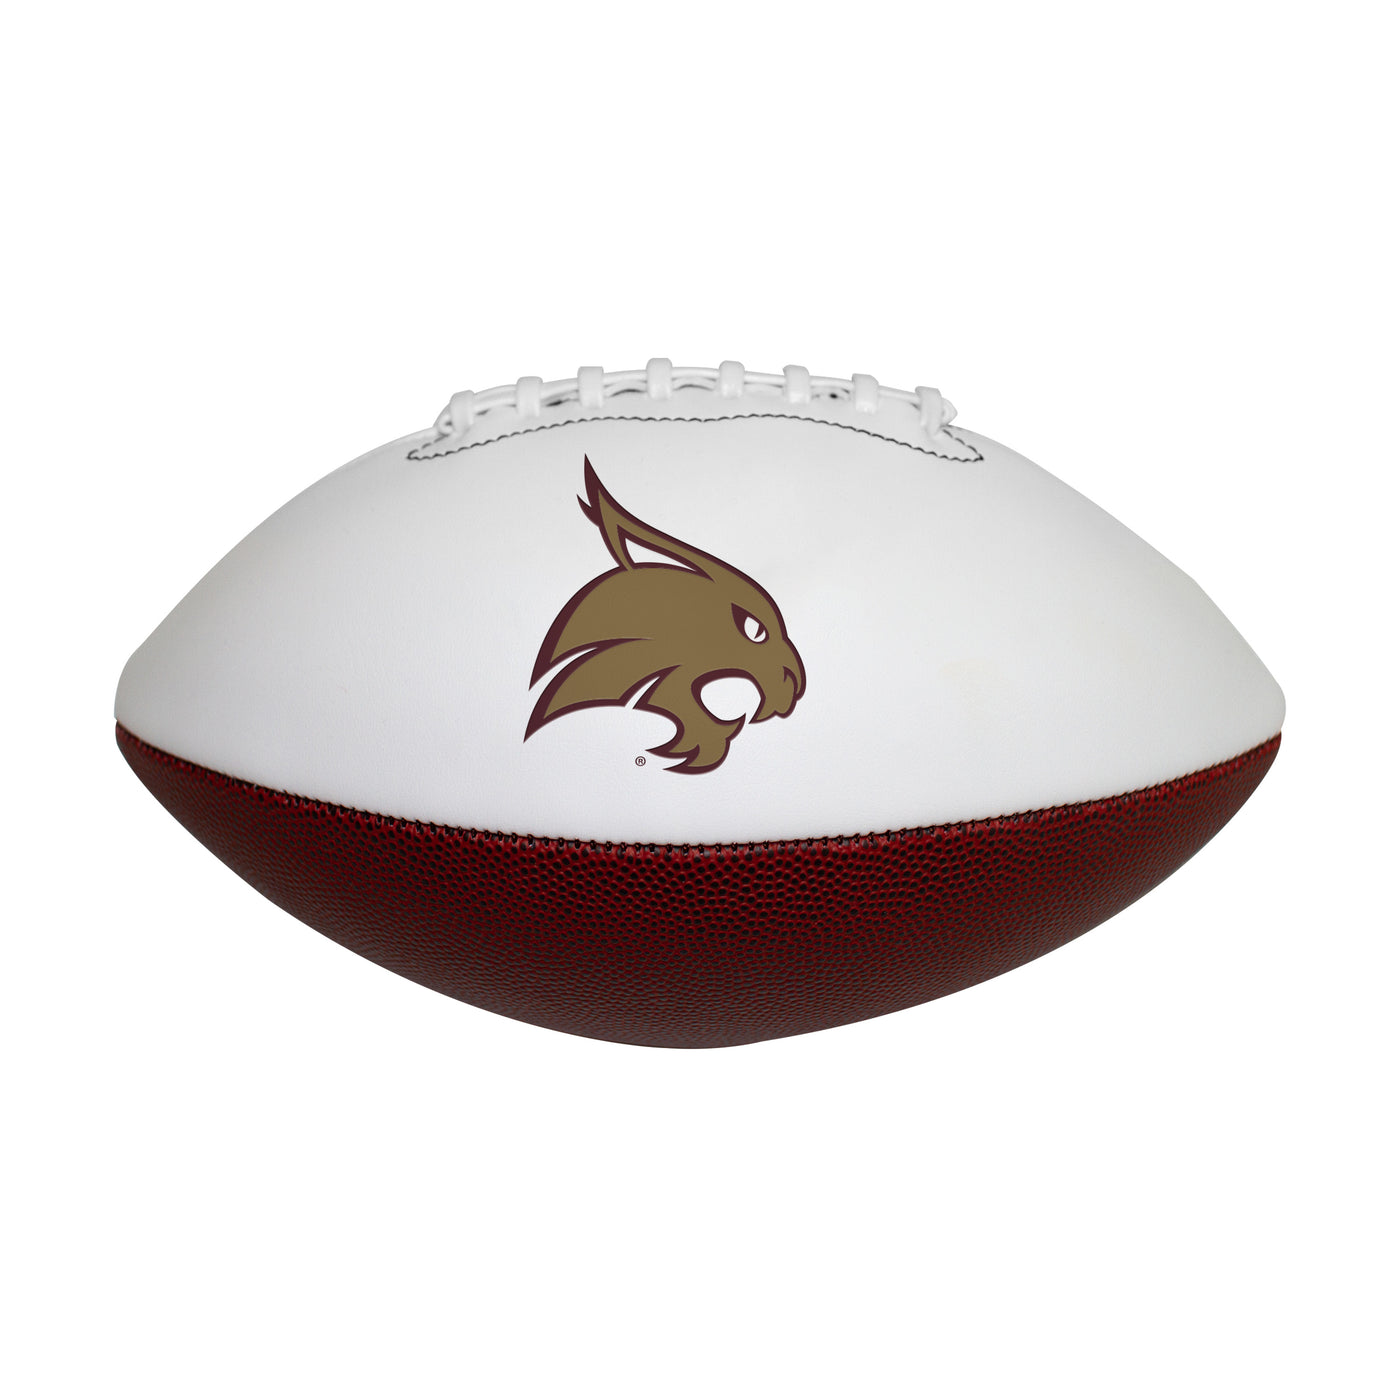 Texas State Official-Size Autograph Football